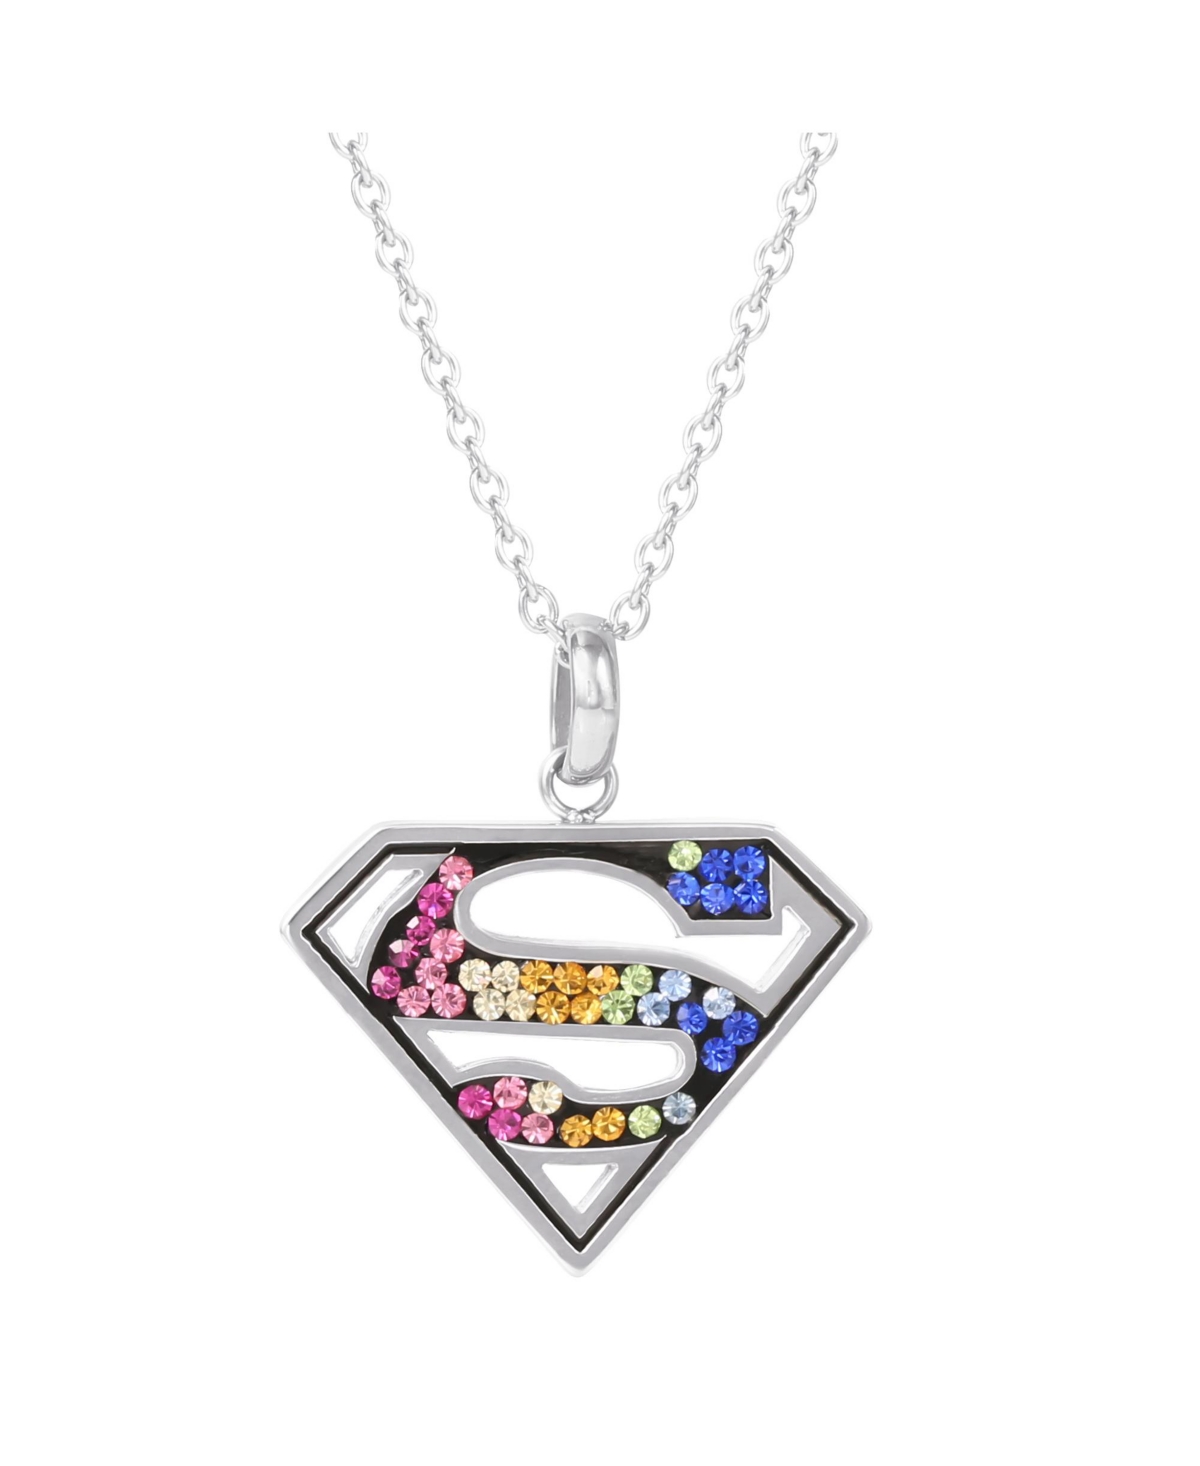 Superman Cutout Stainless Steel Rainbow Crystals Emblem Necklace, 18" - Pink, orange, green, blue